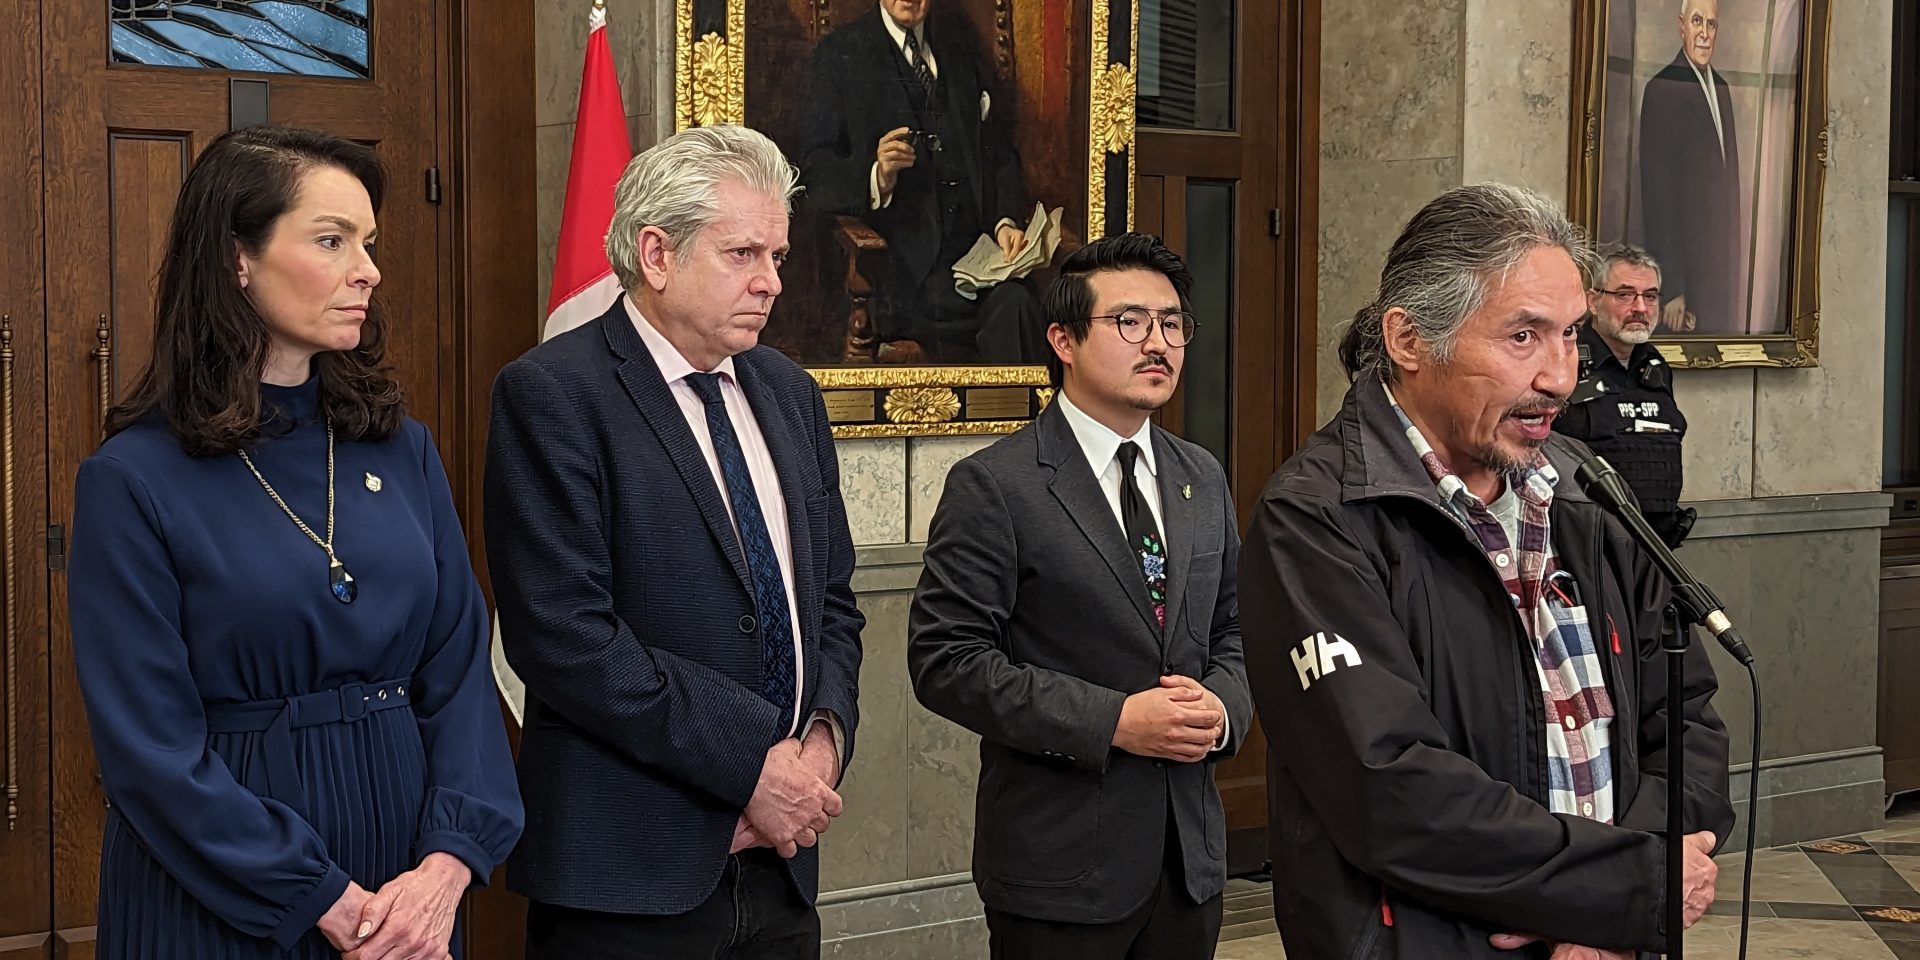 Chief Allan Adam of the Athabaska Chipewyan First Nation speaks to reporters on April 17, 2023, alongside NDP MPs Charlie Angus, Heather McPherson, and Blake Desjarlais. The Hill Times photograph by Kevin Philipupillai